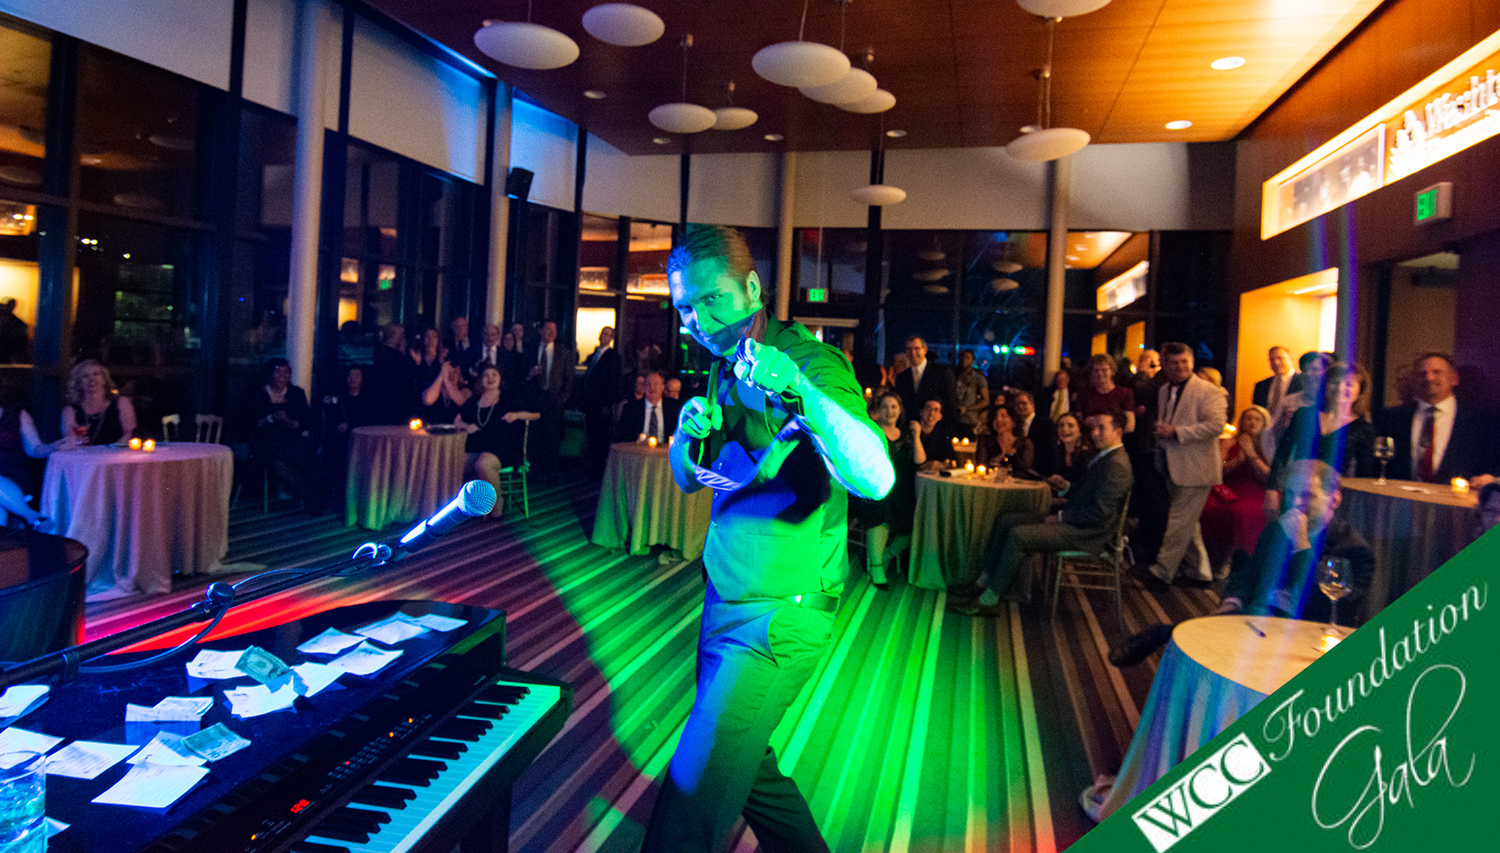 Gala dueling pianos